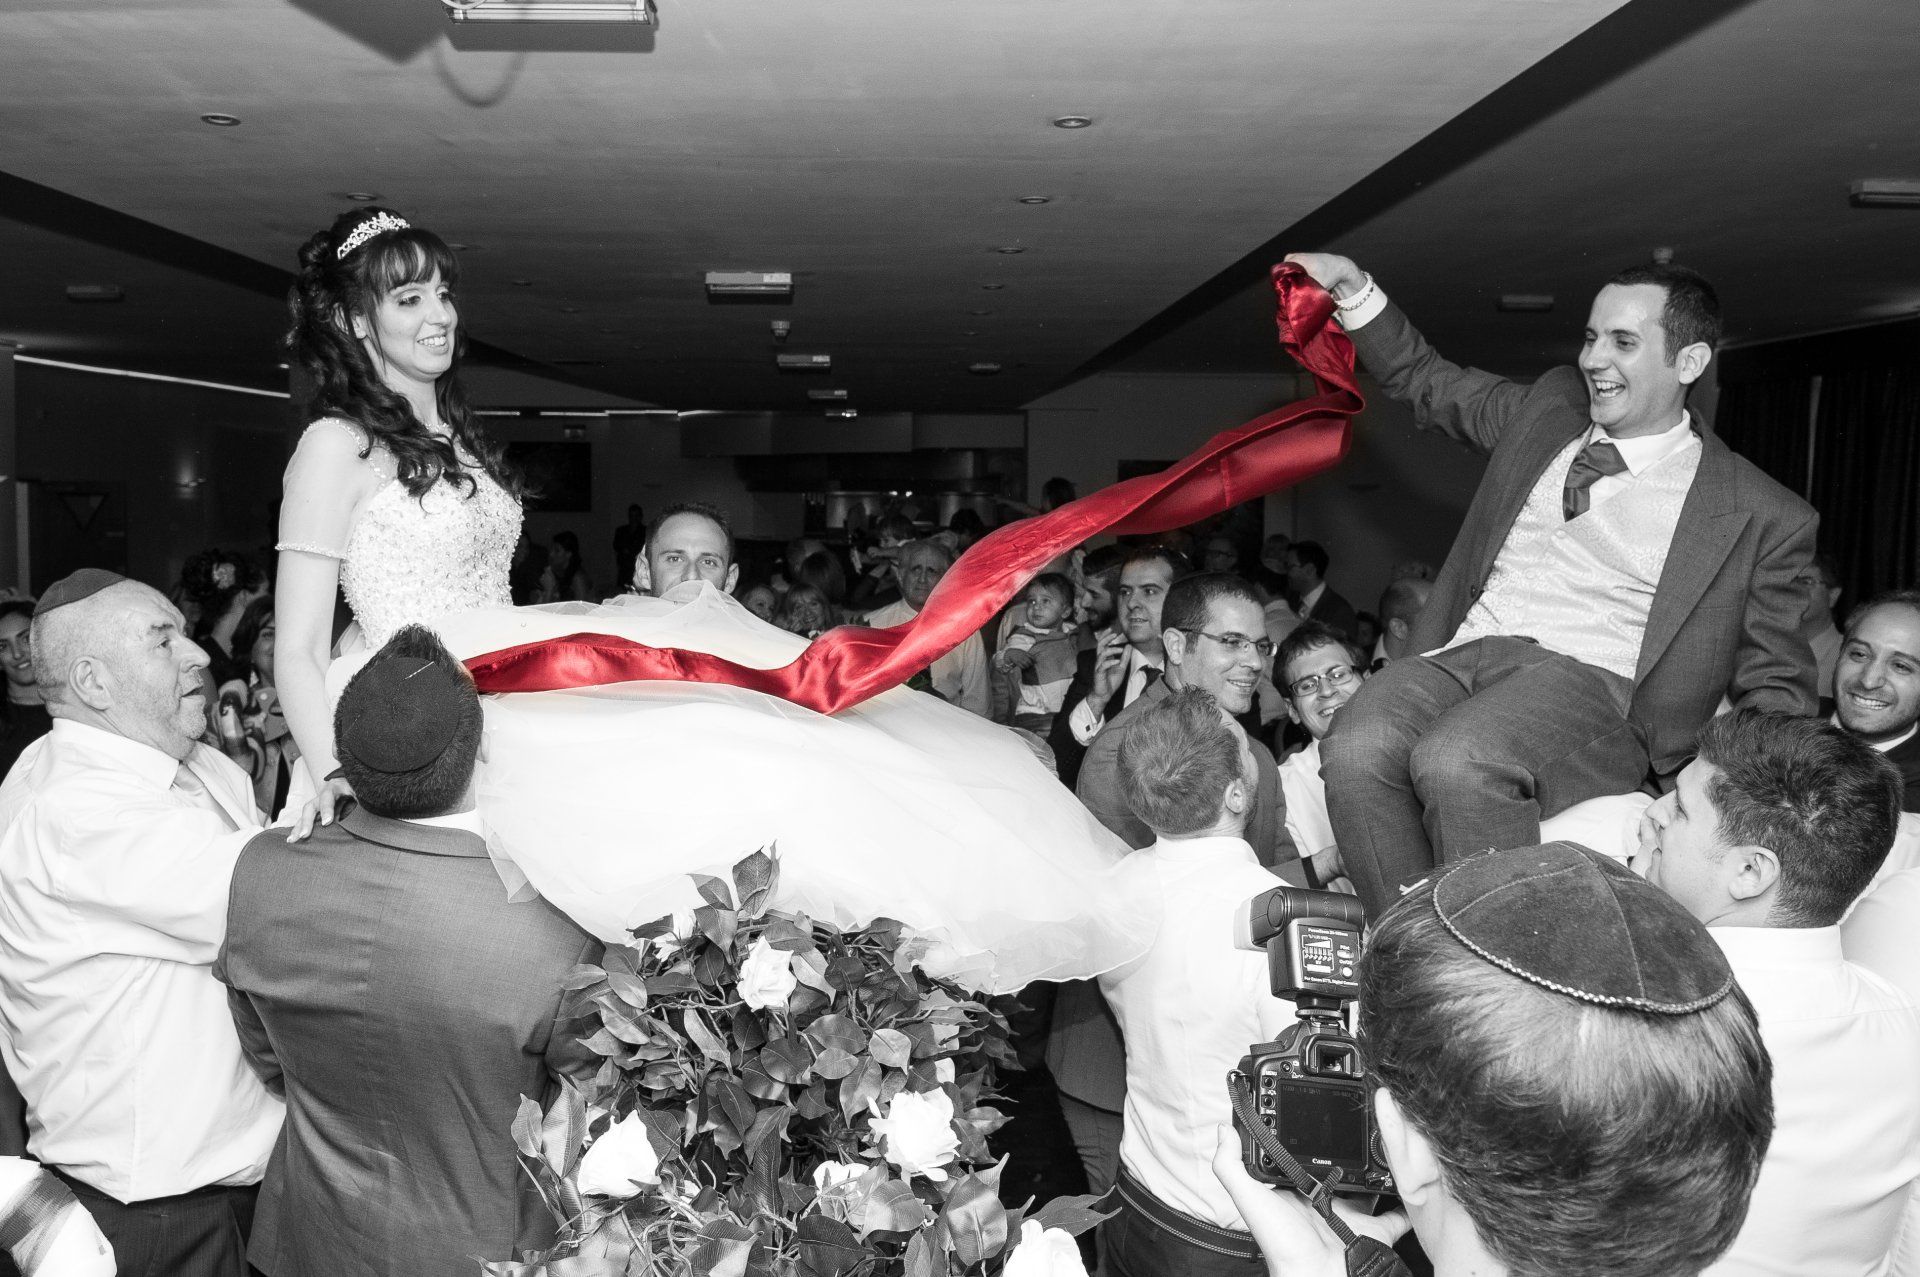 Jewish Bride and Groom sat on chairs, lifted into the air holding a red ribbon